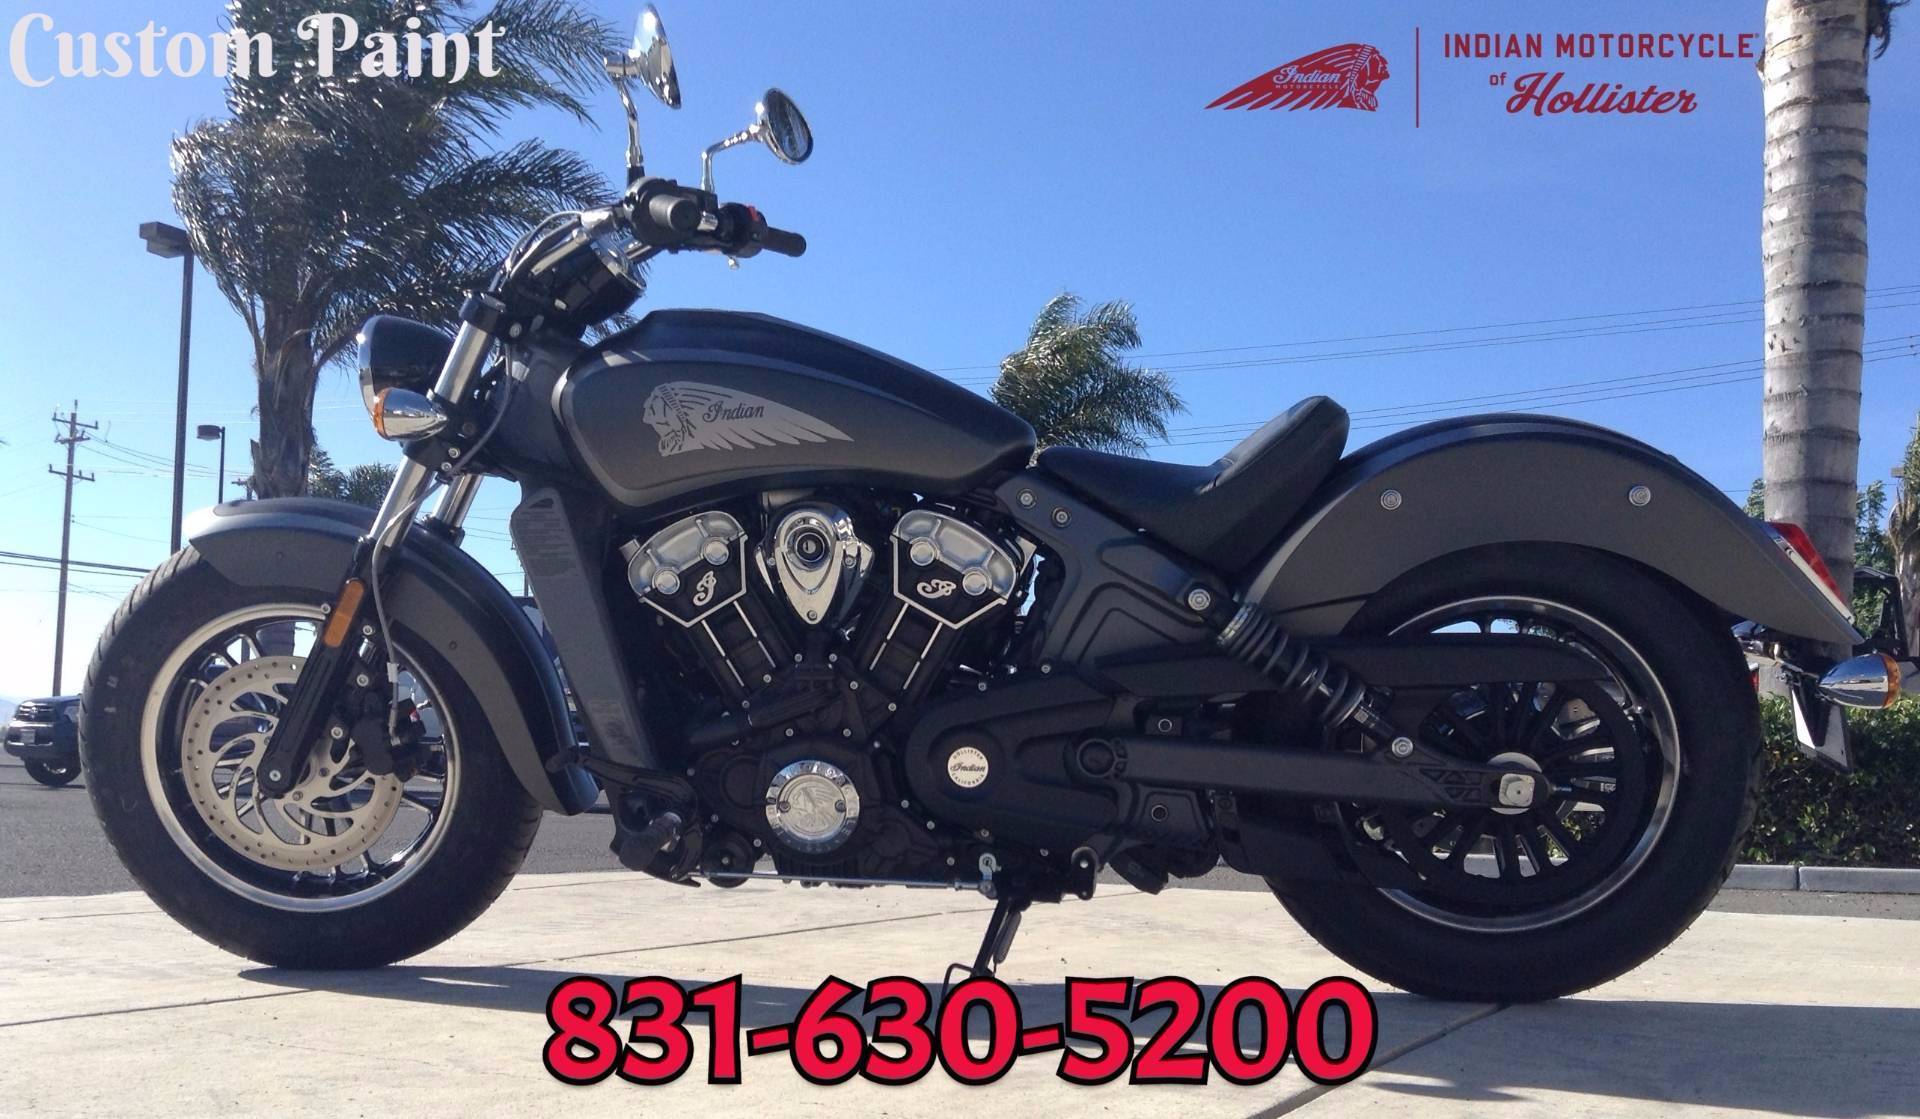 2019 Indian Motorcycle Scout for sale 8742